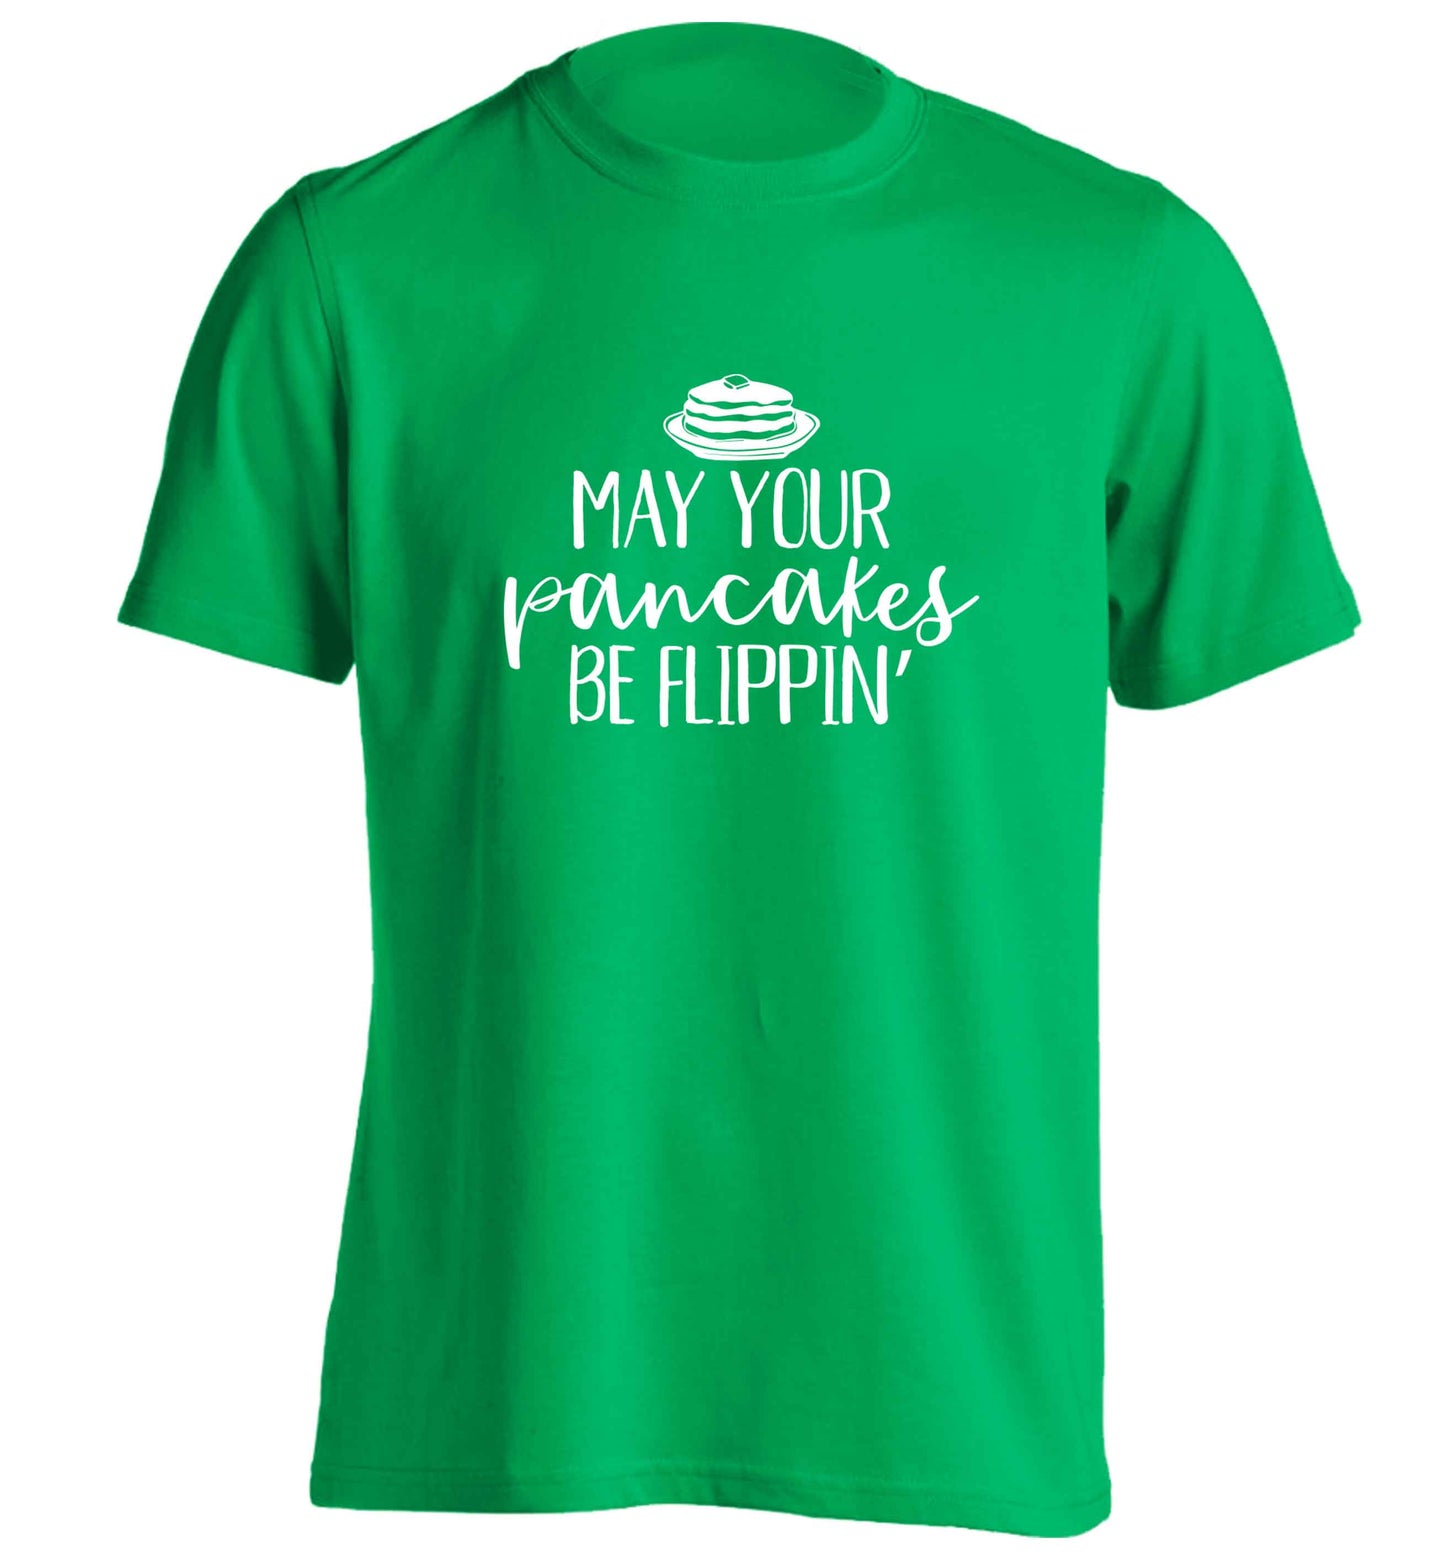 May your pancakes be flippin' adults unisex green Tshirt 2XL